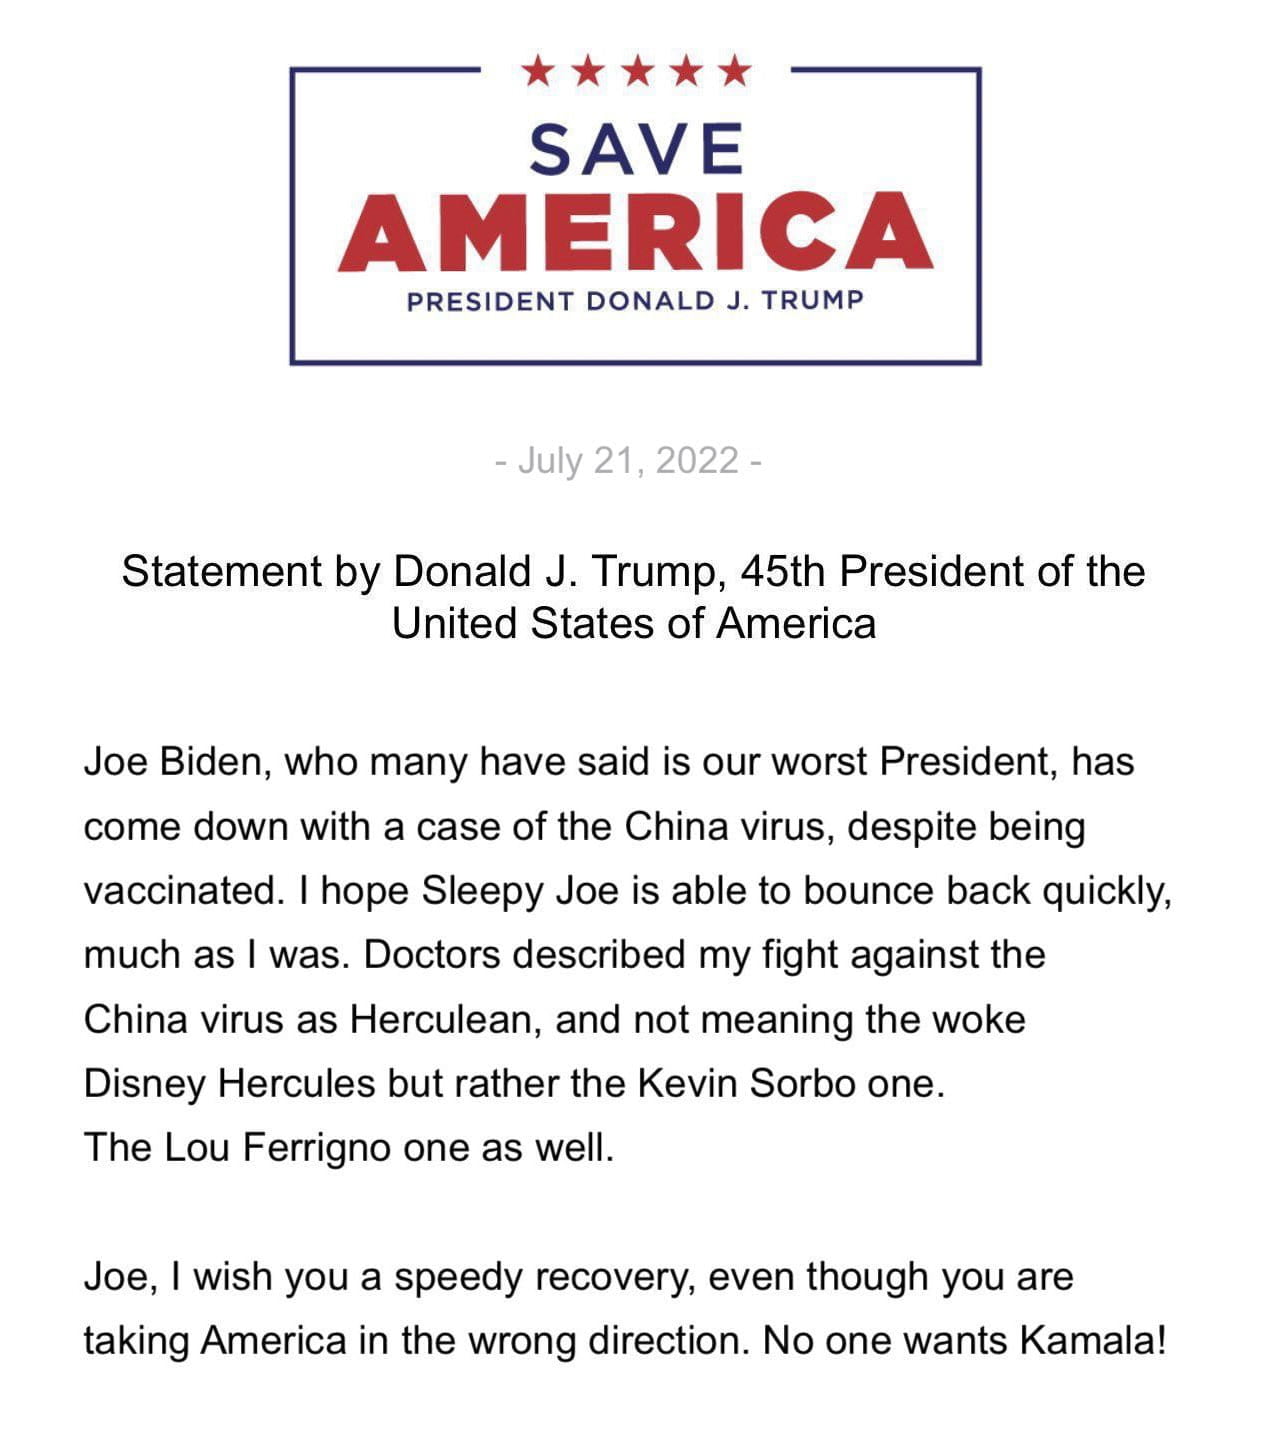 It's a fake, but funny Trump statement on Biden...